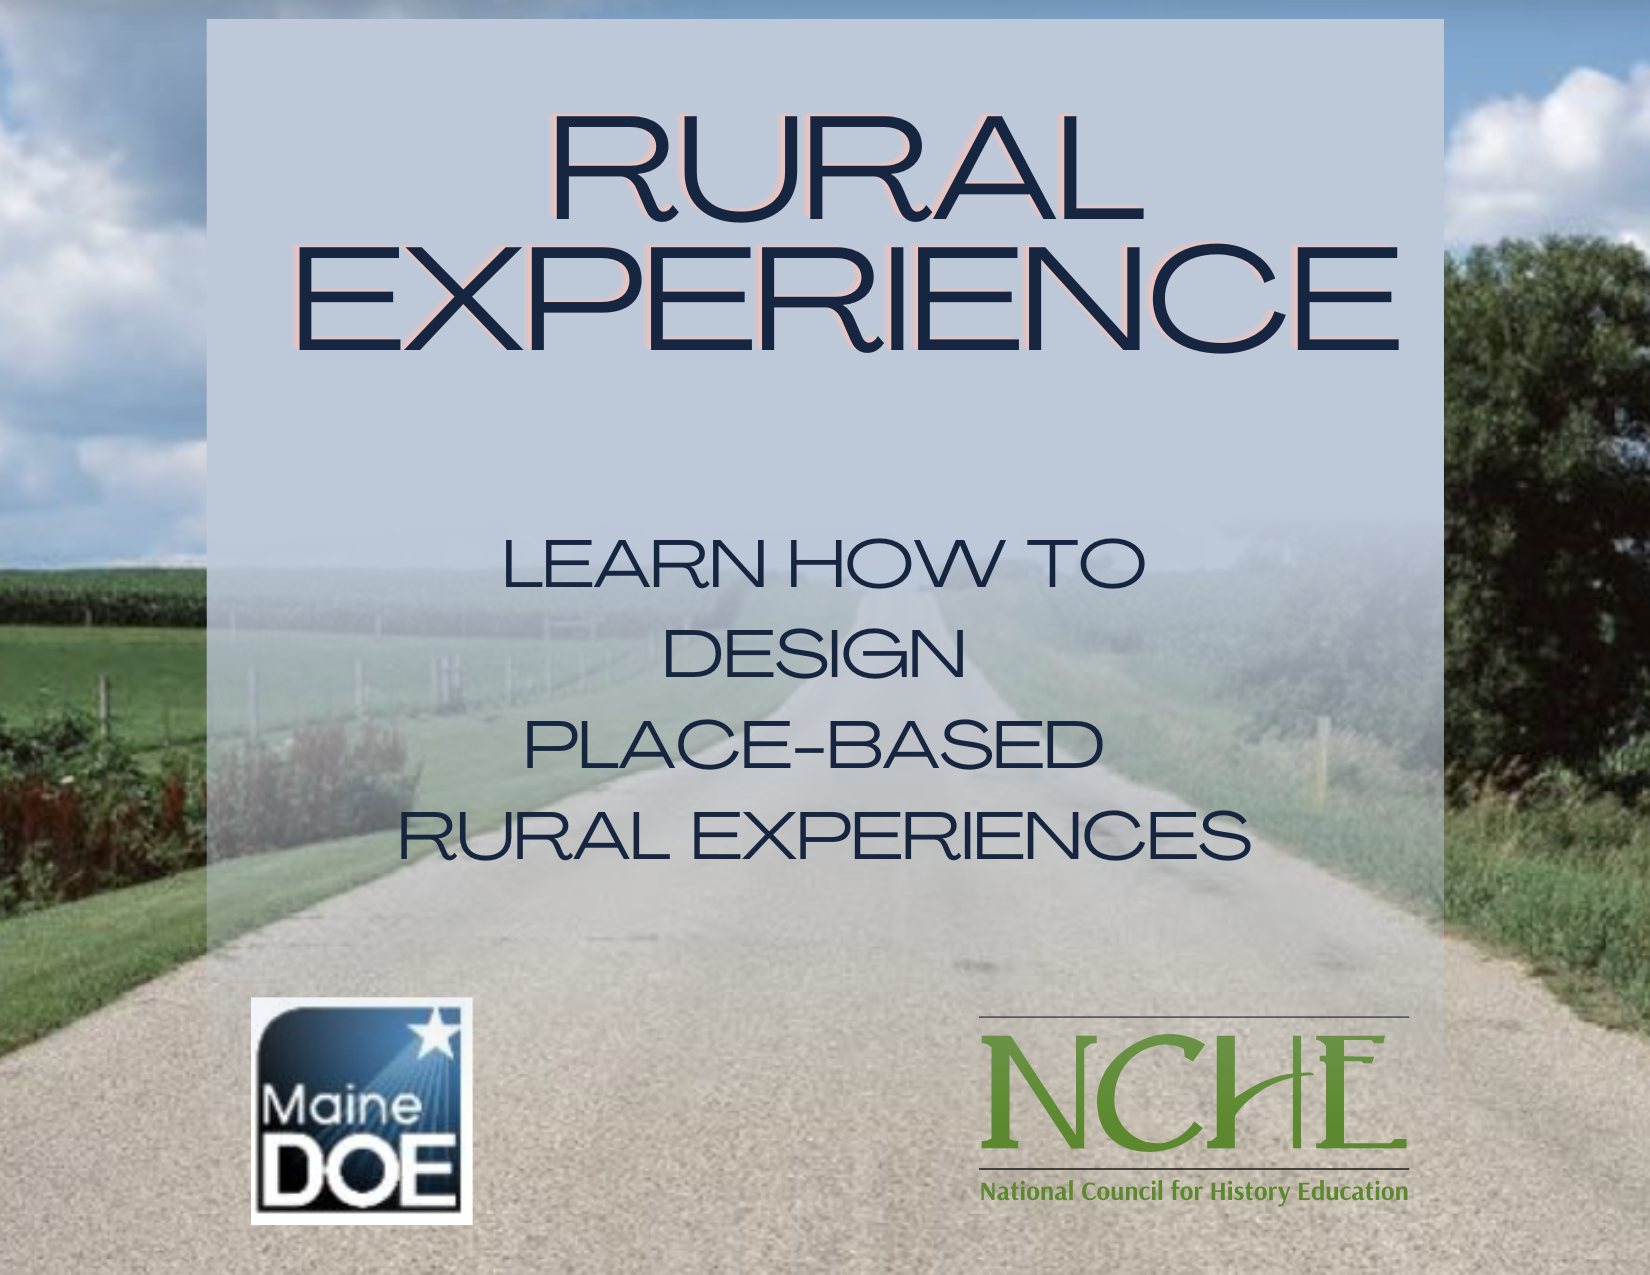 The rural experience